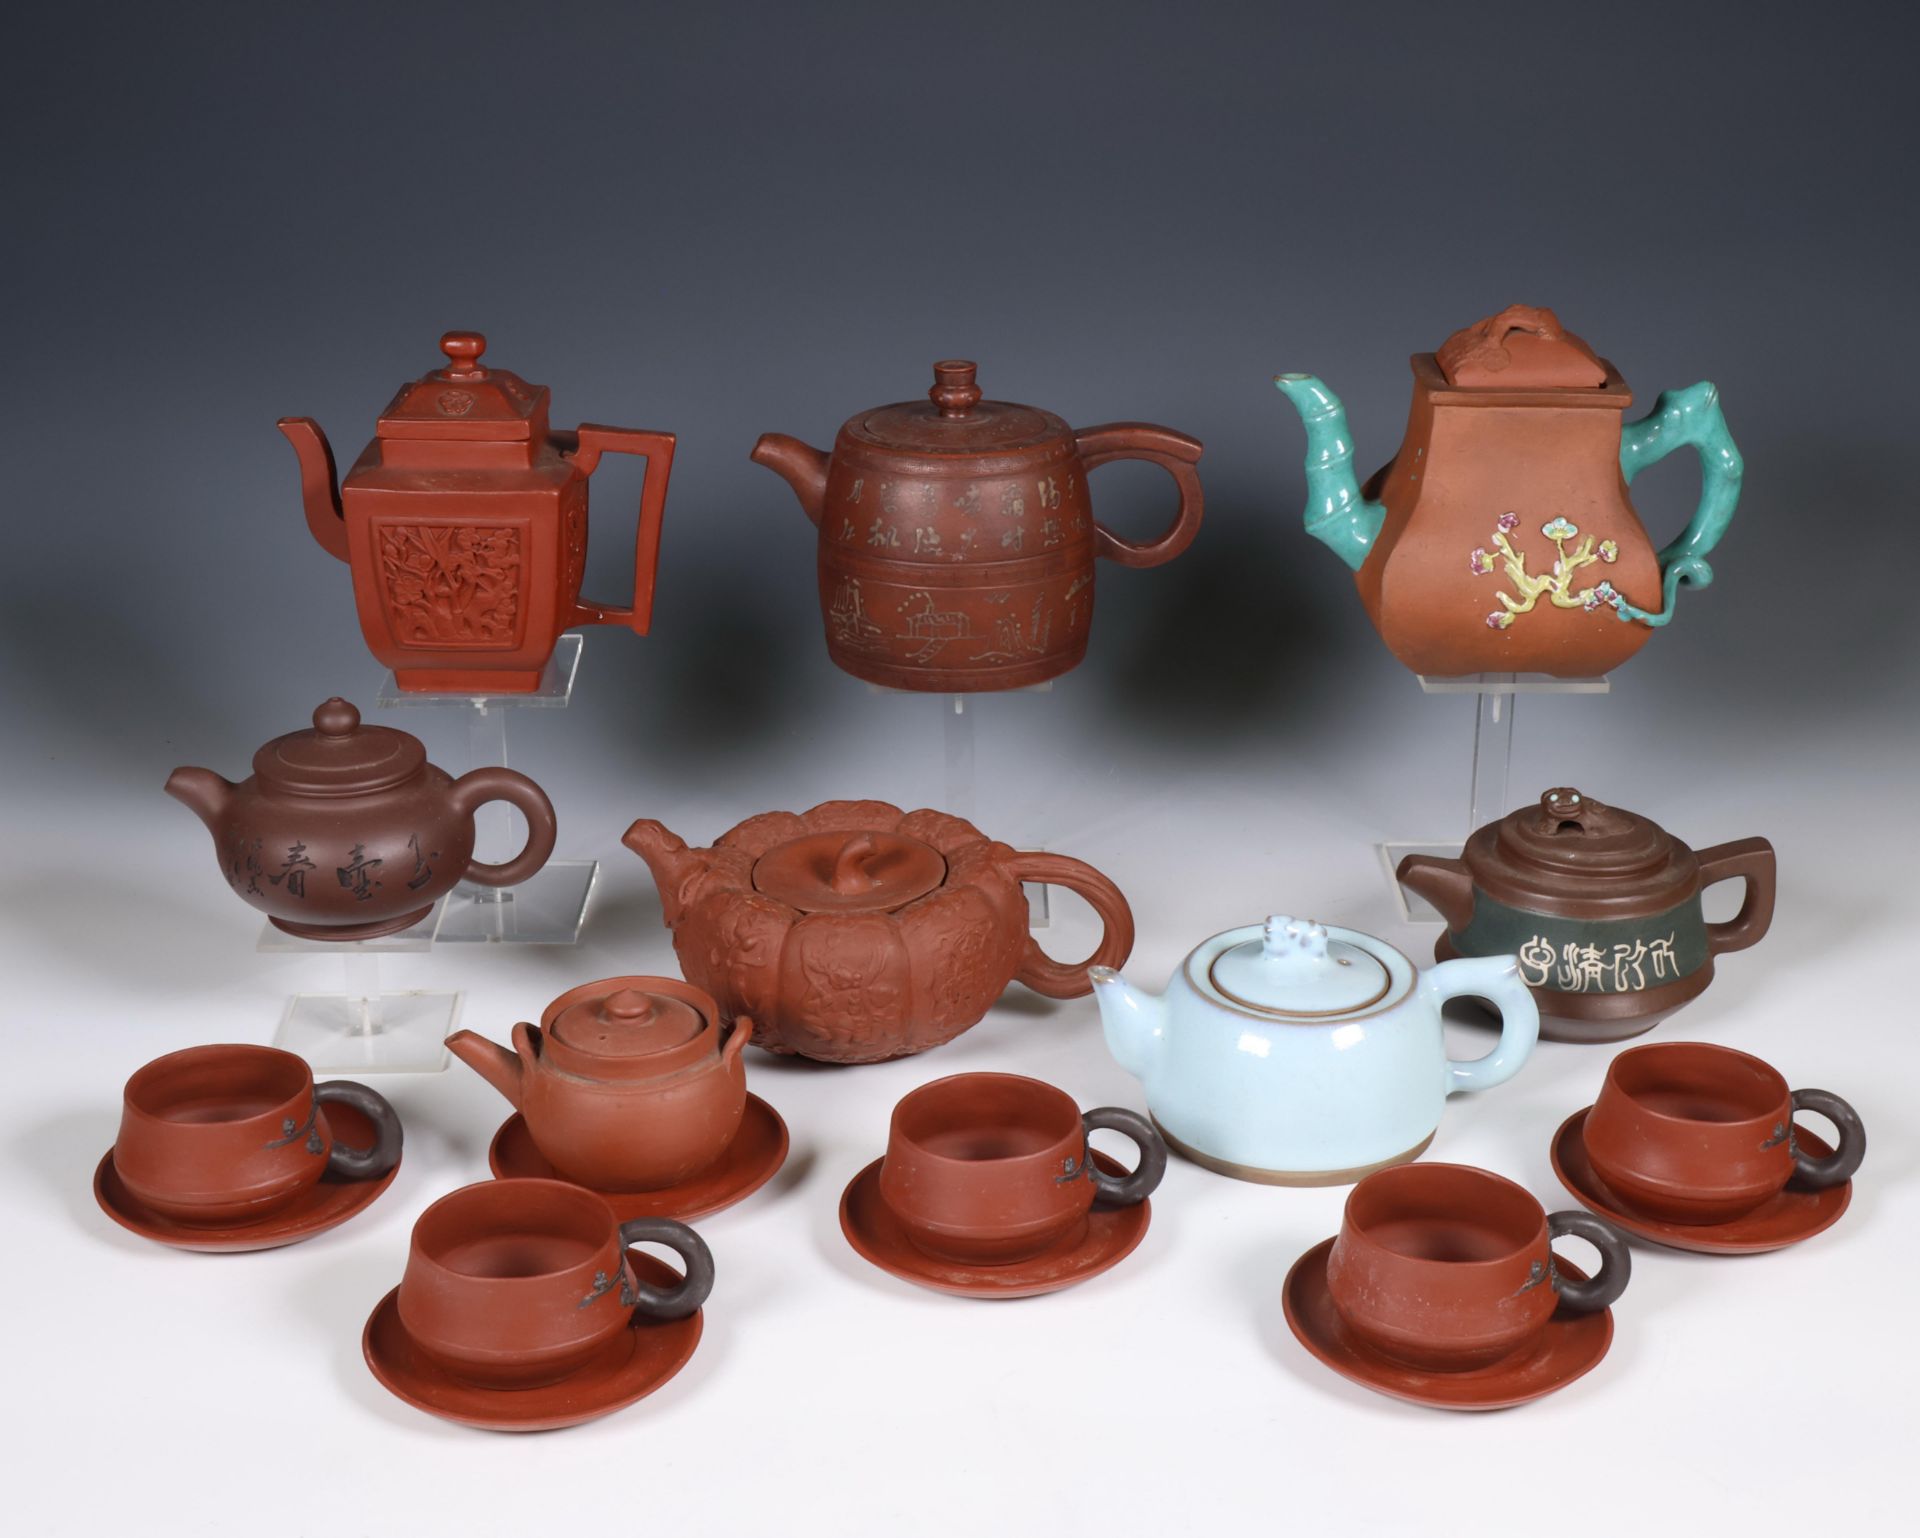 China, collection of Yixing earthenware teapots, cups and saucers,